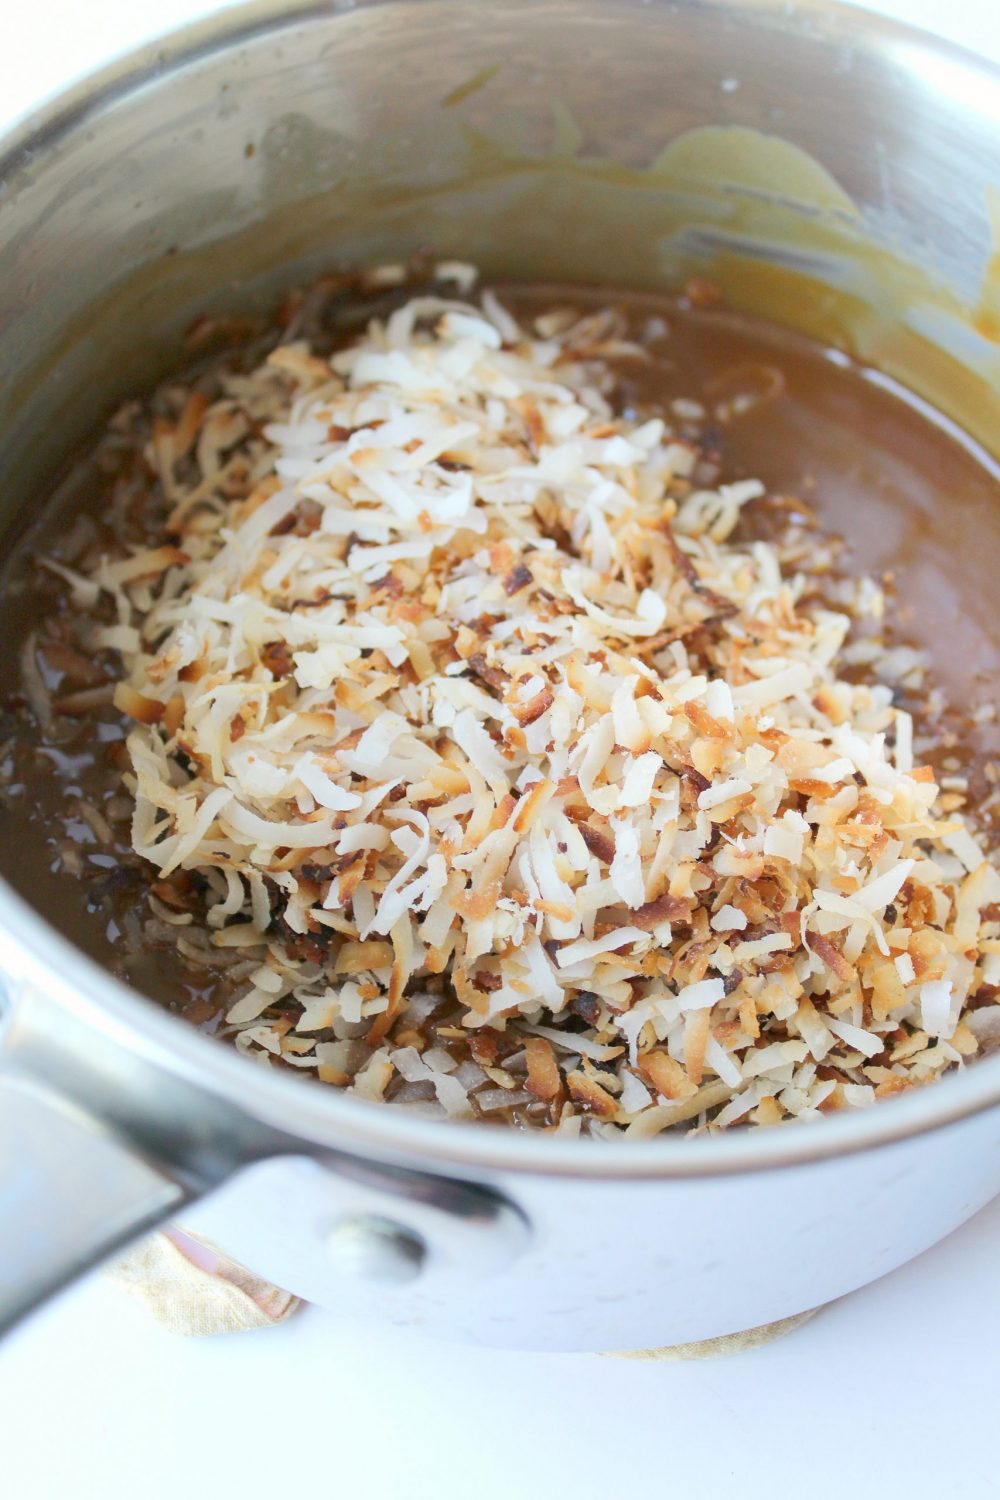 Slowly stir in the toasted coconut and spread over the chocolate-covered crust.